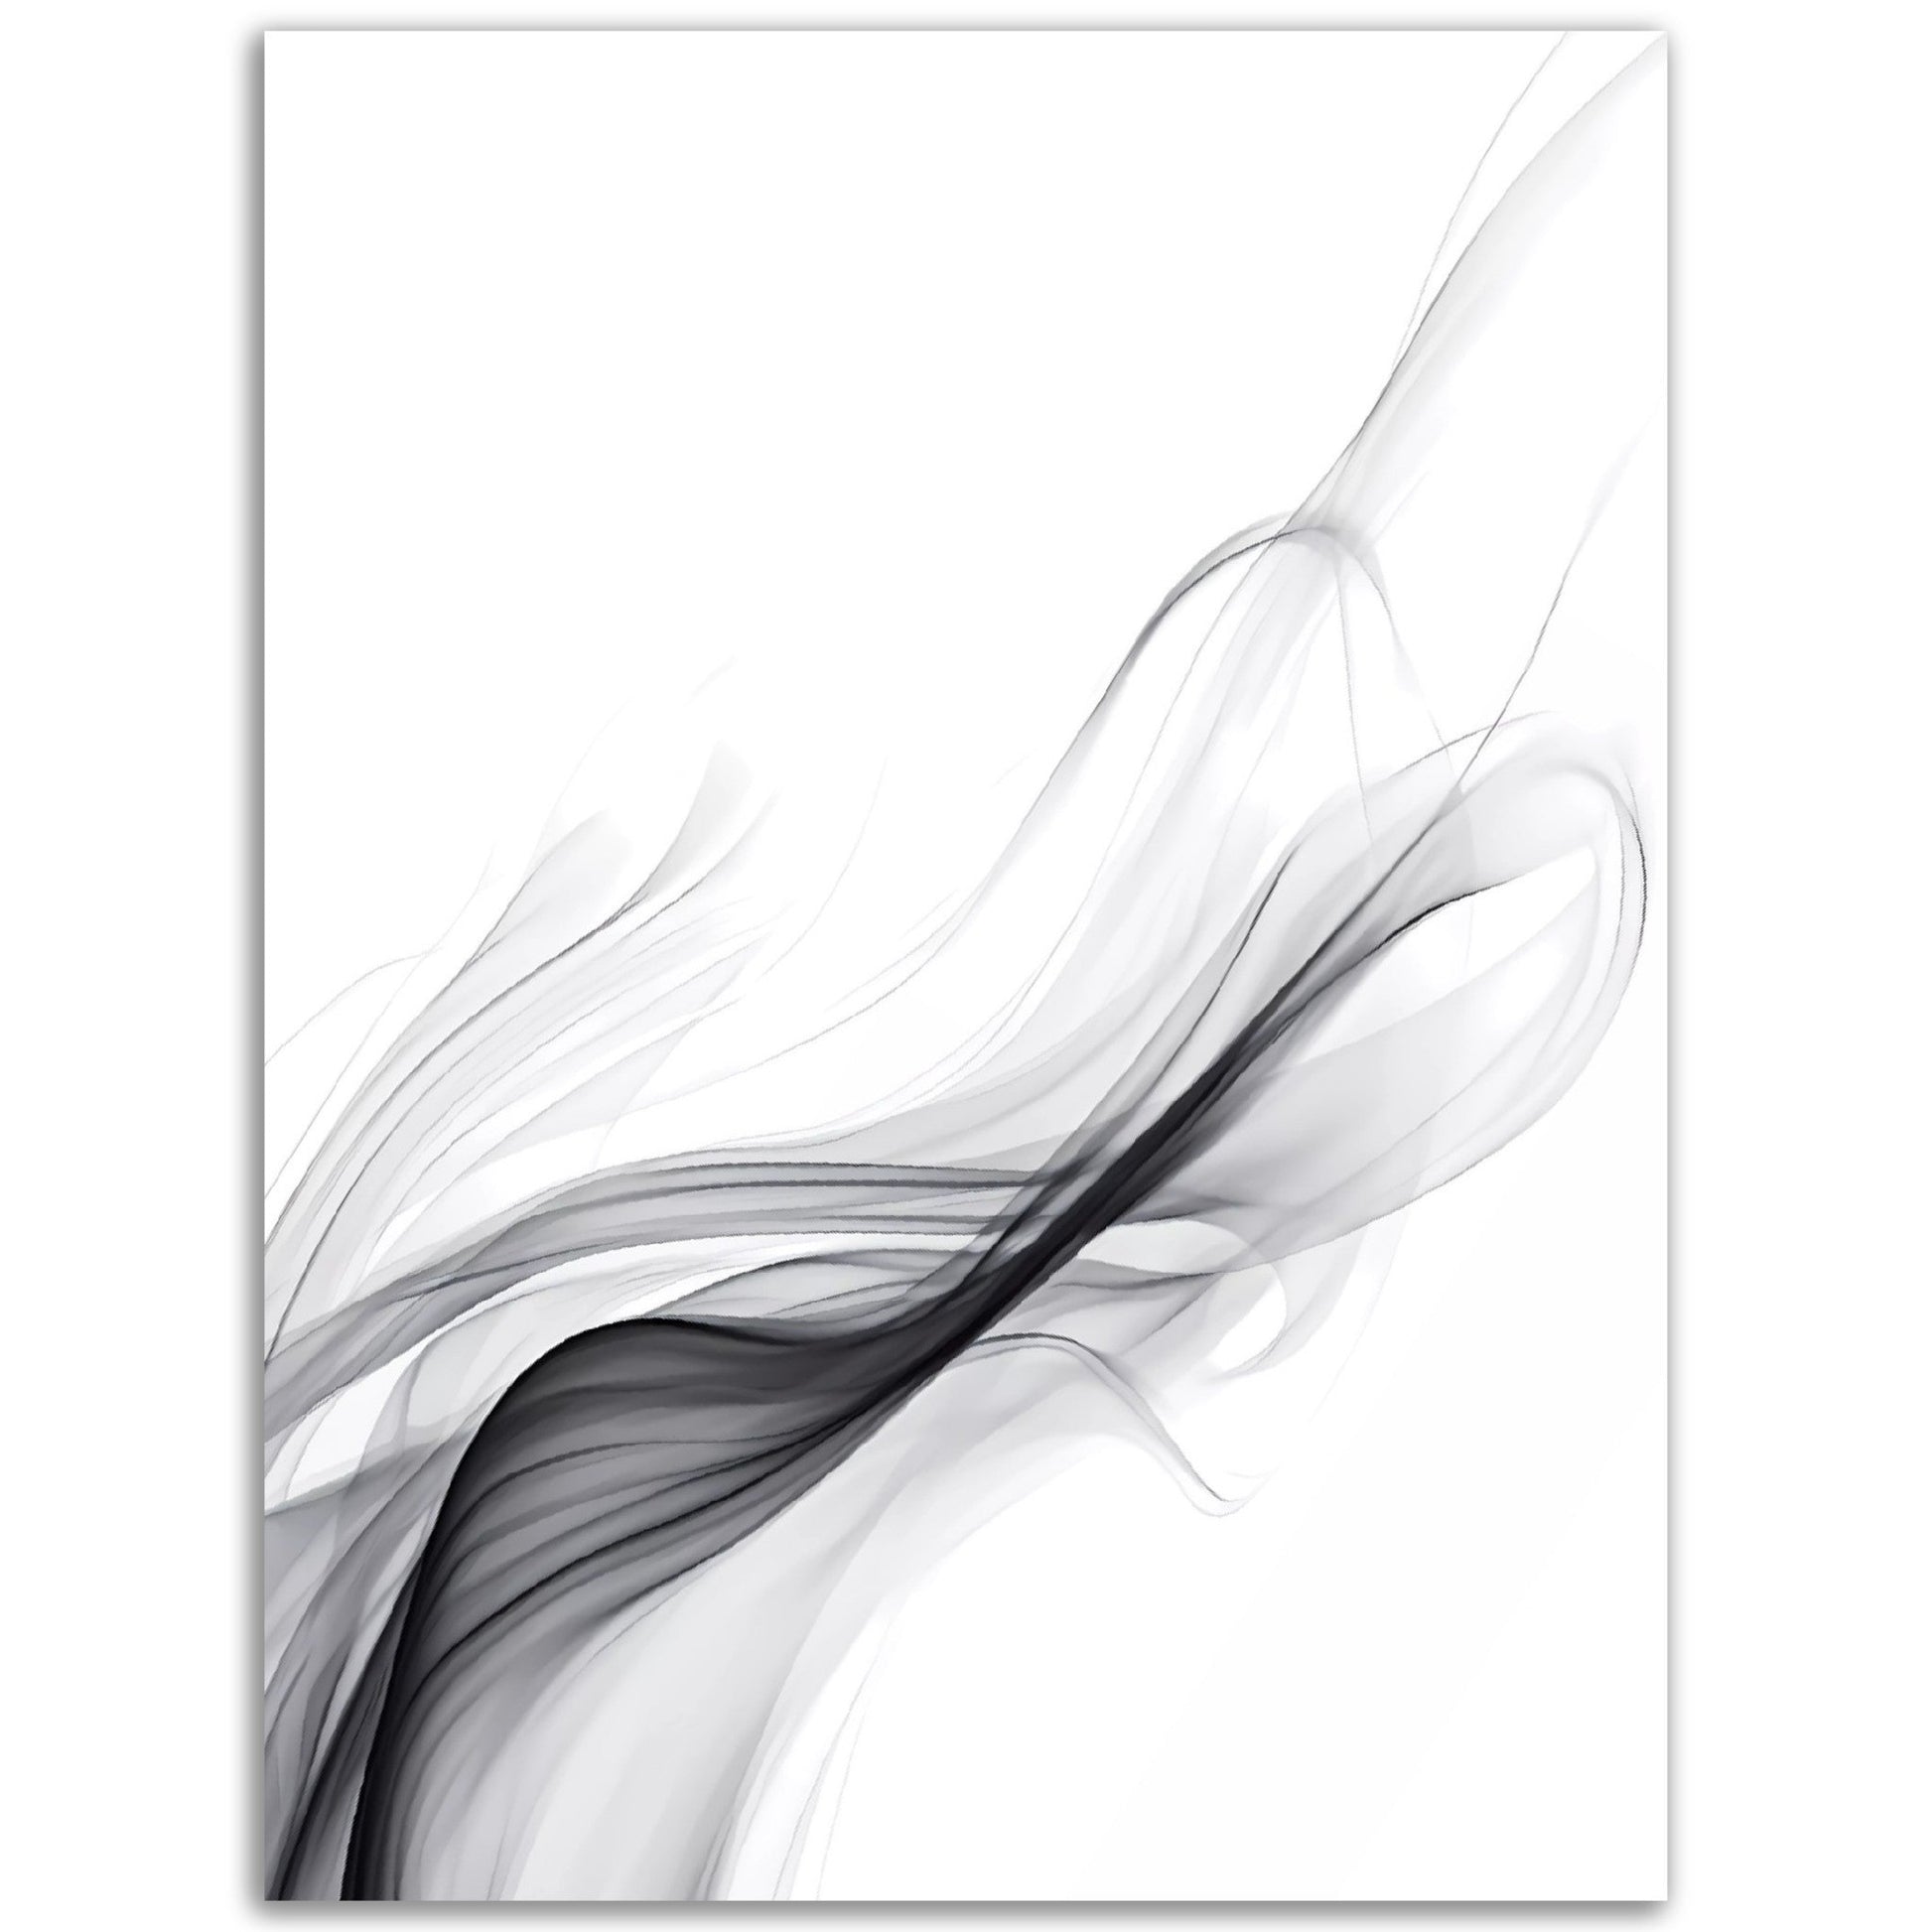 A black and white Abstract Art painting on a white background, available as high quality Smoketower posters.